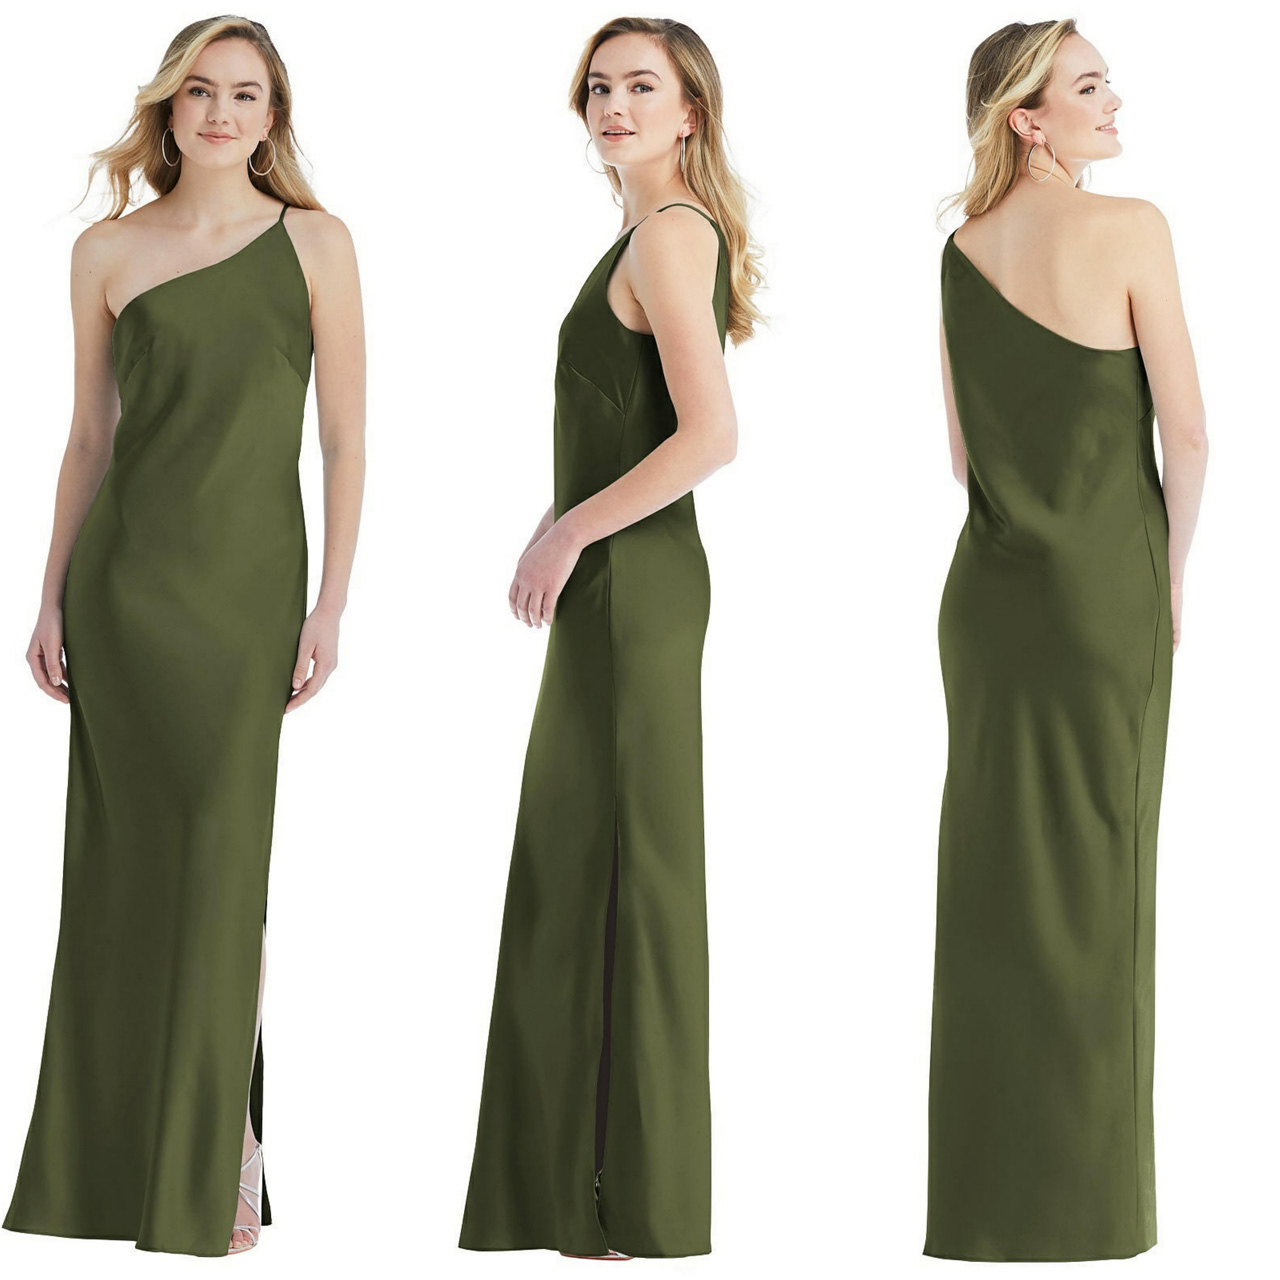 Green Bridesmaids Gowns in an Amazing Range of Styles - Bridal and Formal